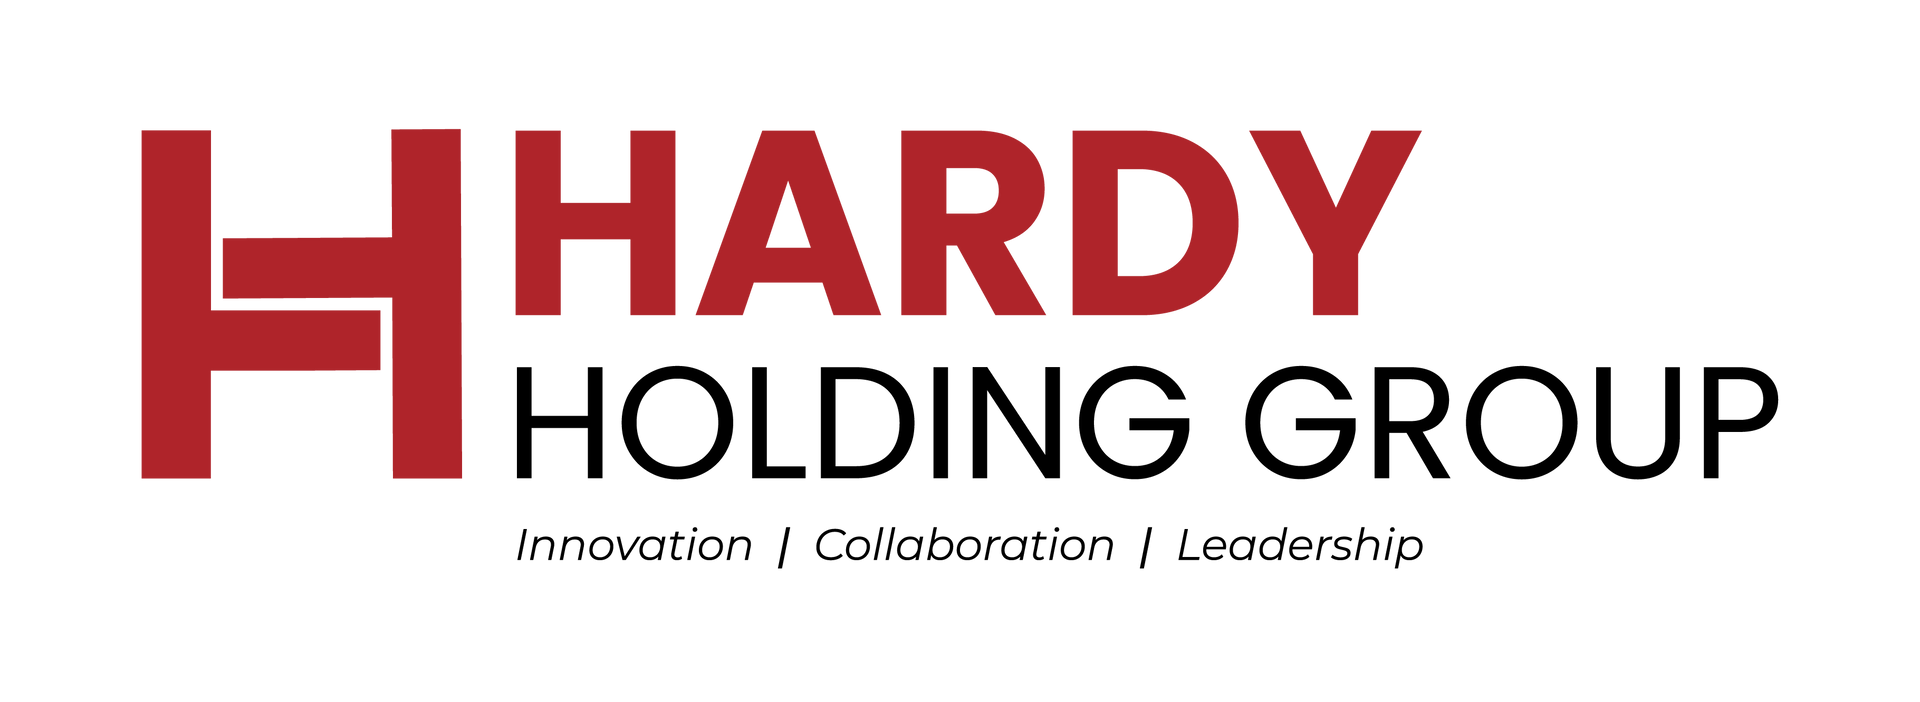 Hardy Holding Group Logo. We Build the Best Infrastructure Solutions in the Midwest.